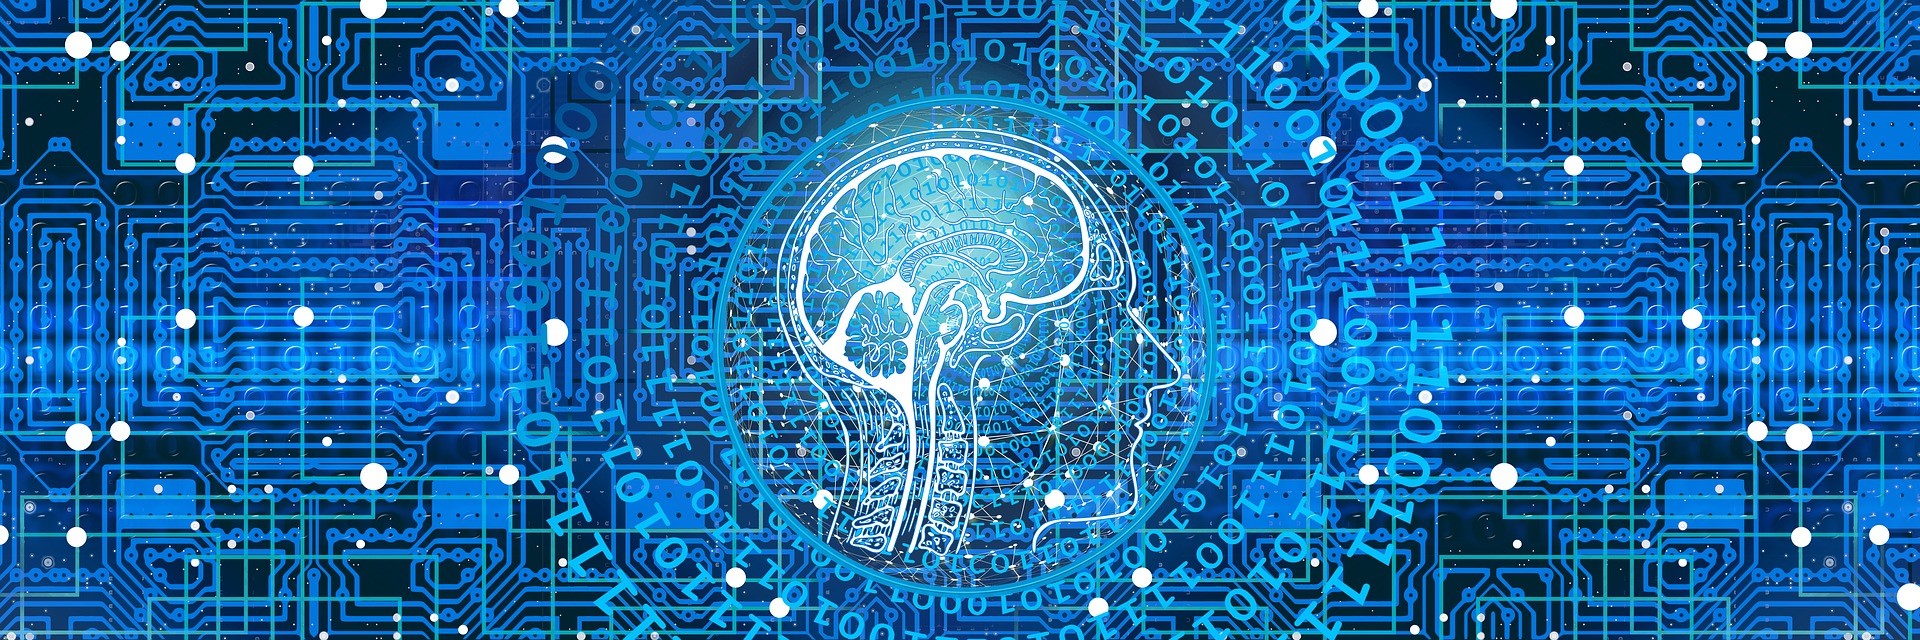 Graphic of a circuit board leading to an illustration of the human brain